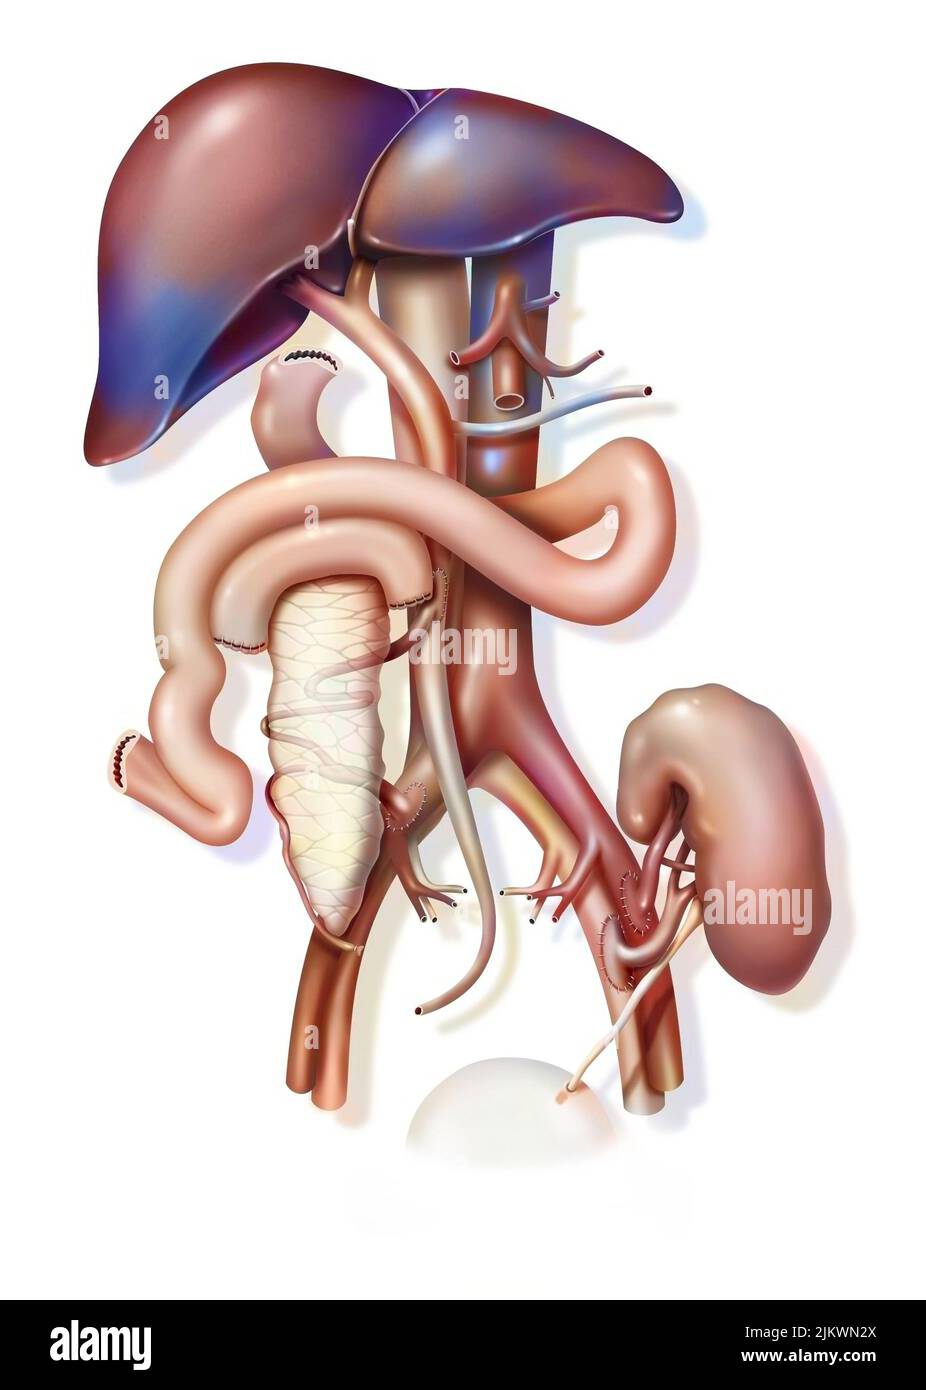 Combined pancreas and kidney transplant: implantation of grafts. Stock Photo